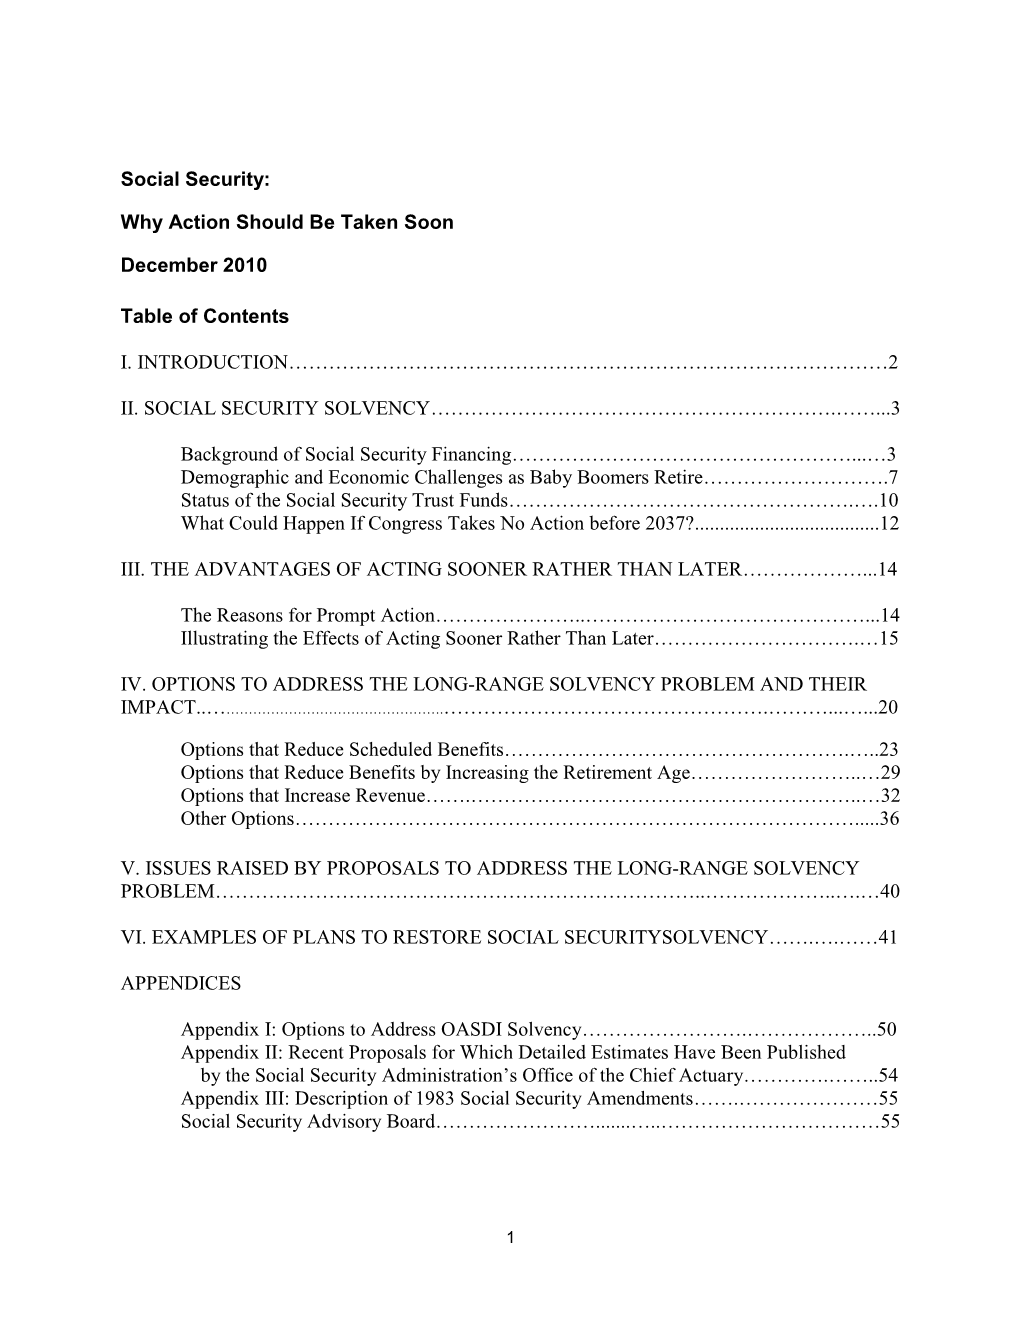 2010 Social Security-Why Action Should Be Taken Soon 2010 508.Pdf